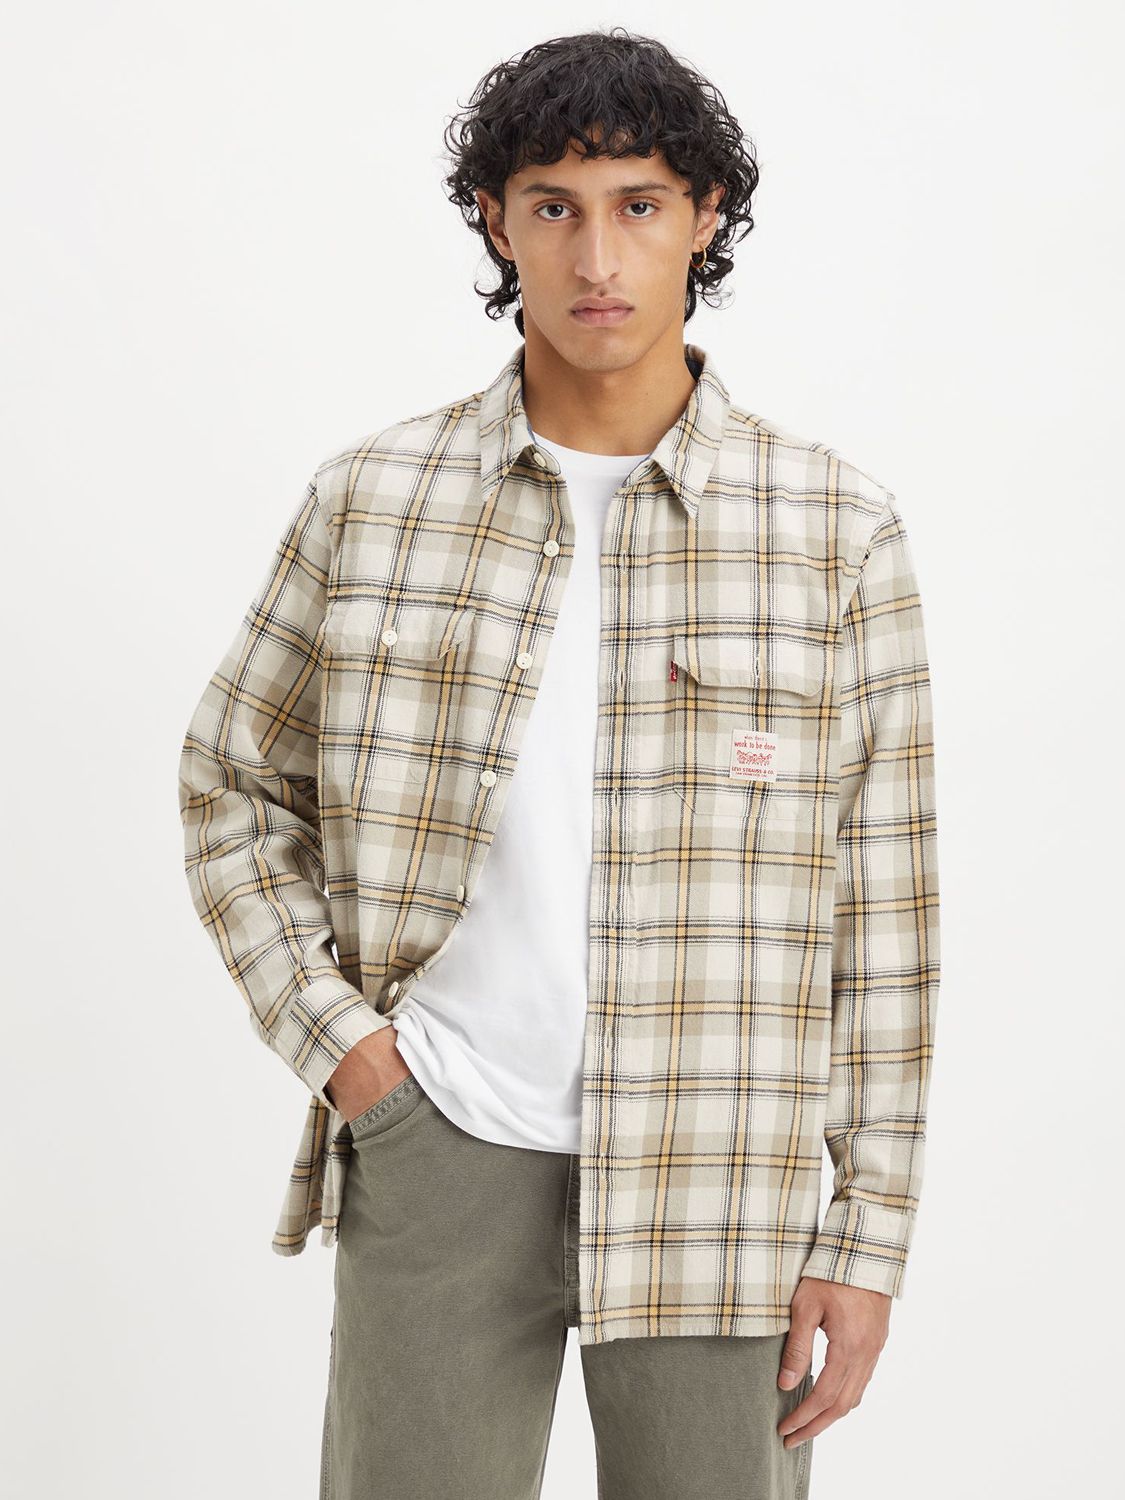 Levi's Classic Worker Check Shirt, Rainy Day at John Lewis & Partners